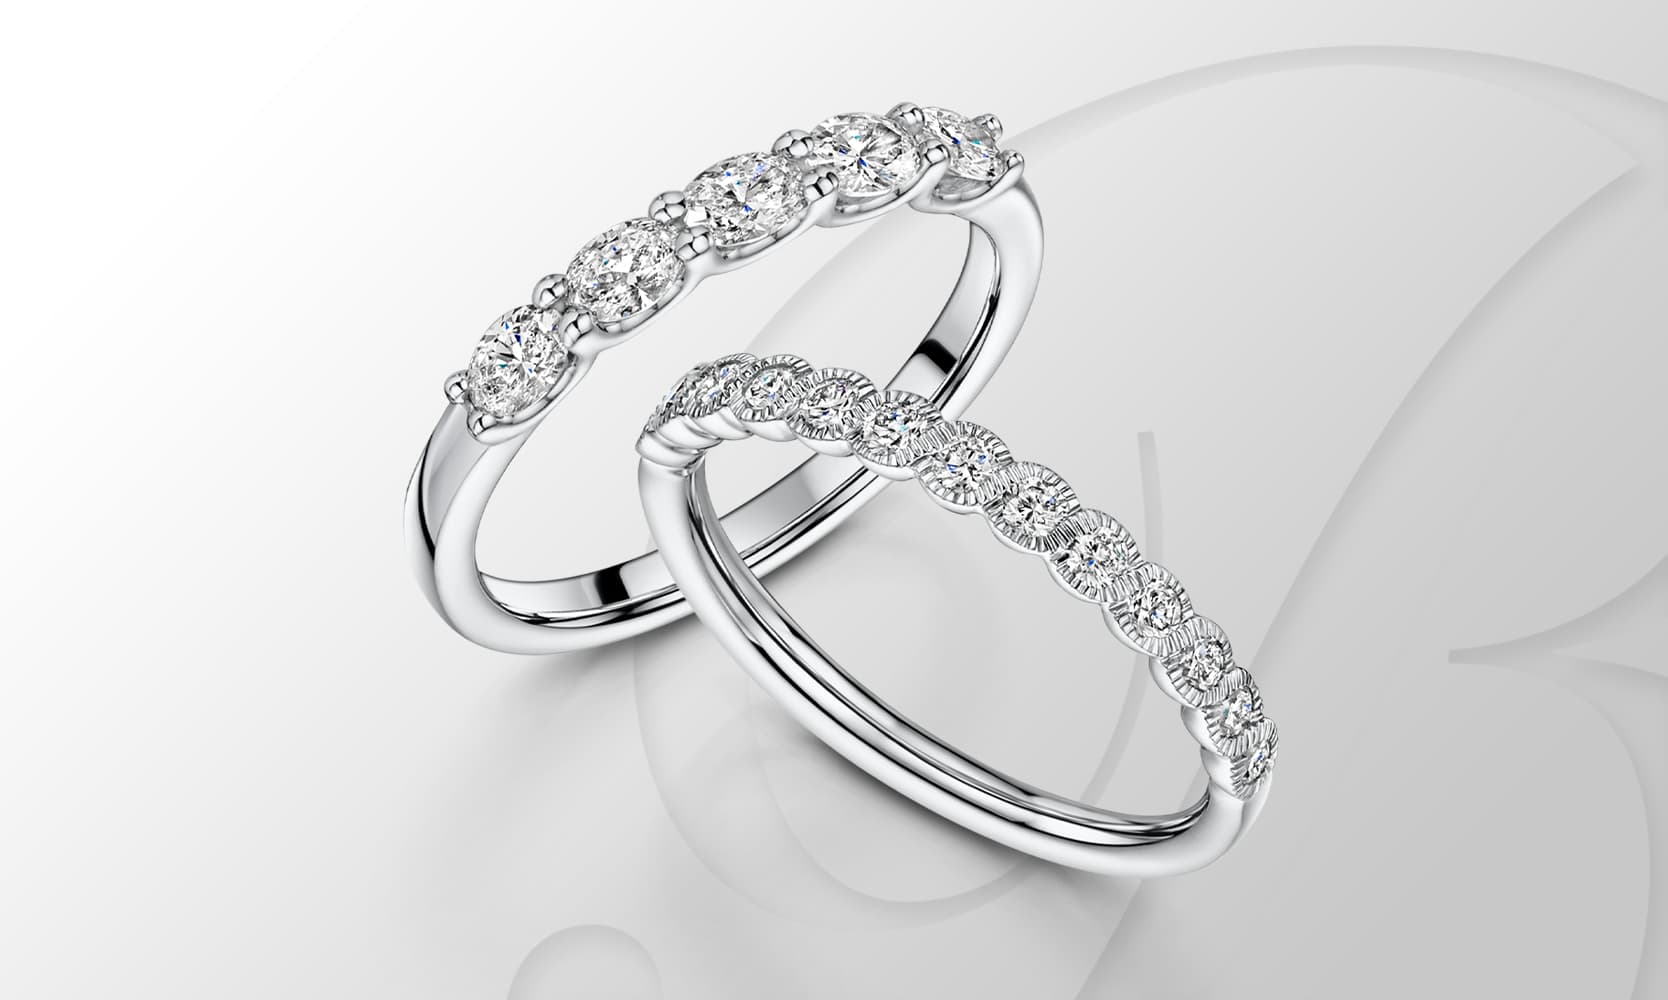 What is an eternity ring?